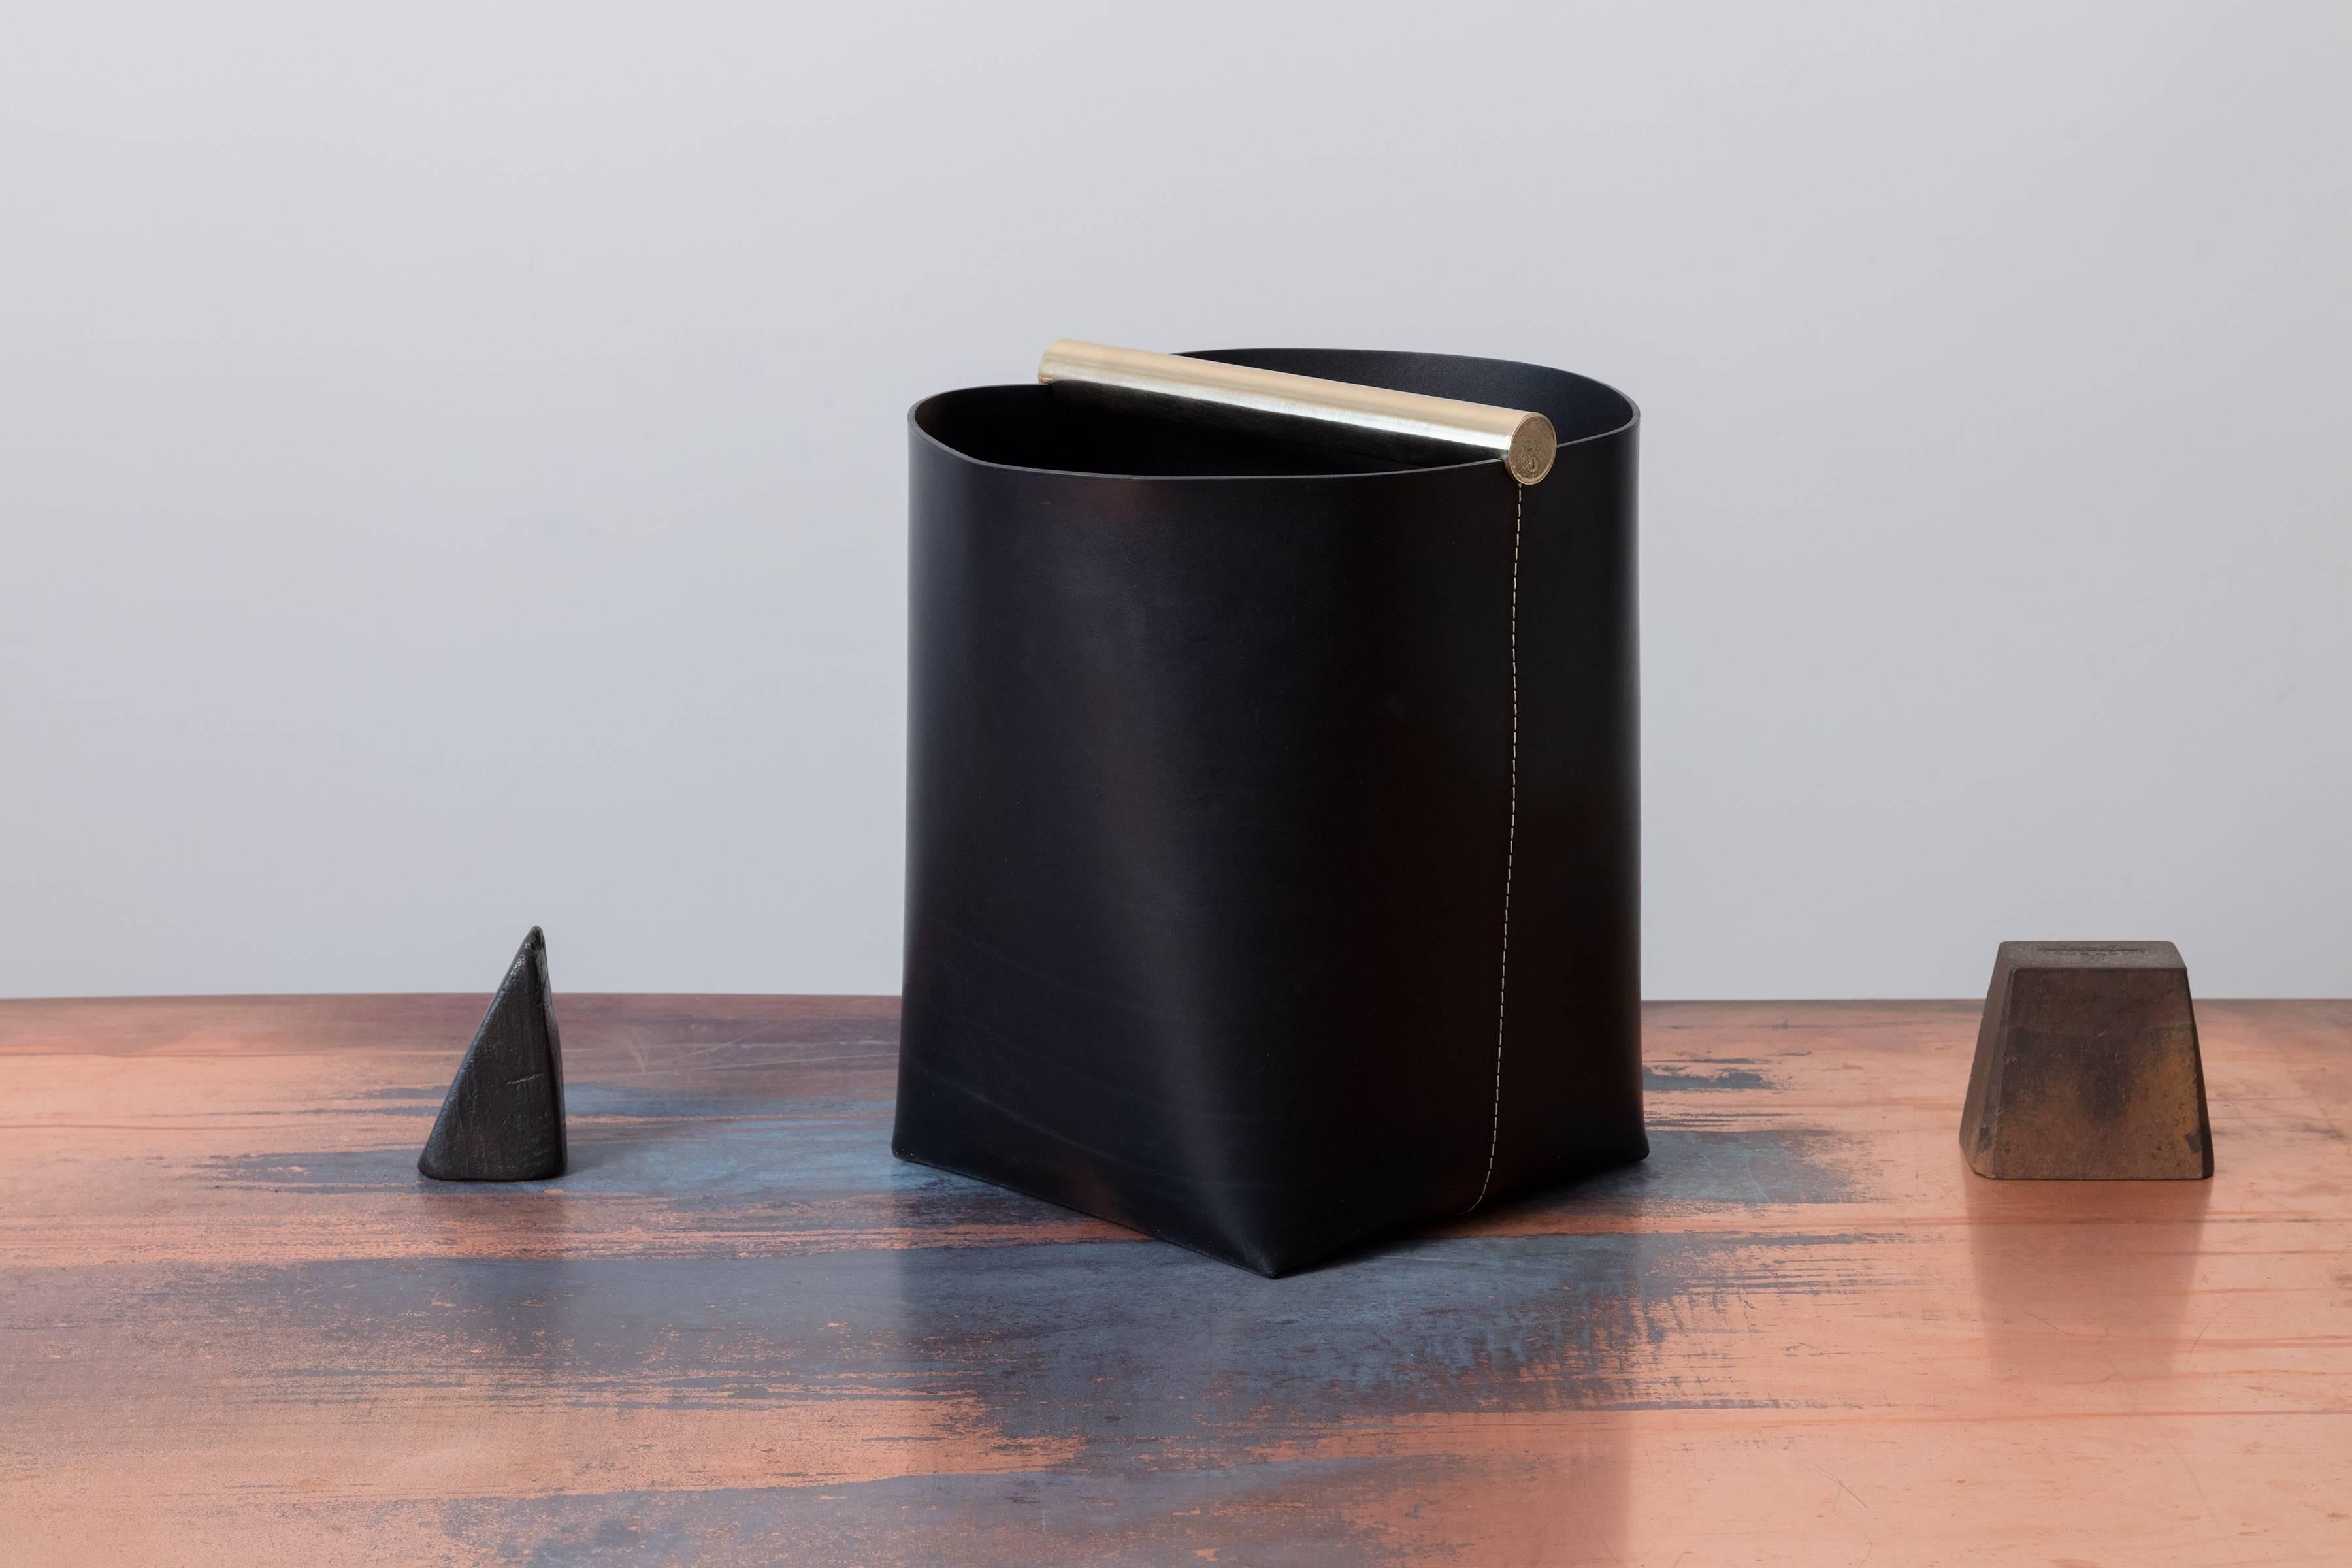 Part of Les Few's Julie collection, this contemporary, leather and brass, modern, minimalist waste paper basket are made by artisans in Sweden. The leather waste paper basket comes in jet black with jet black leather interior, white contrast